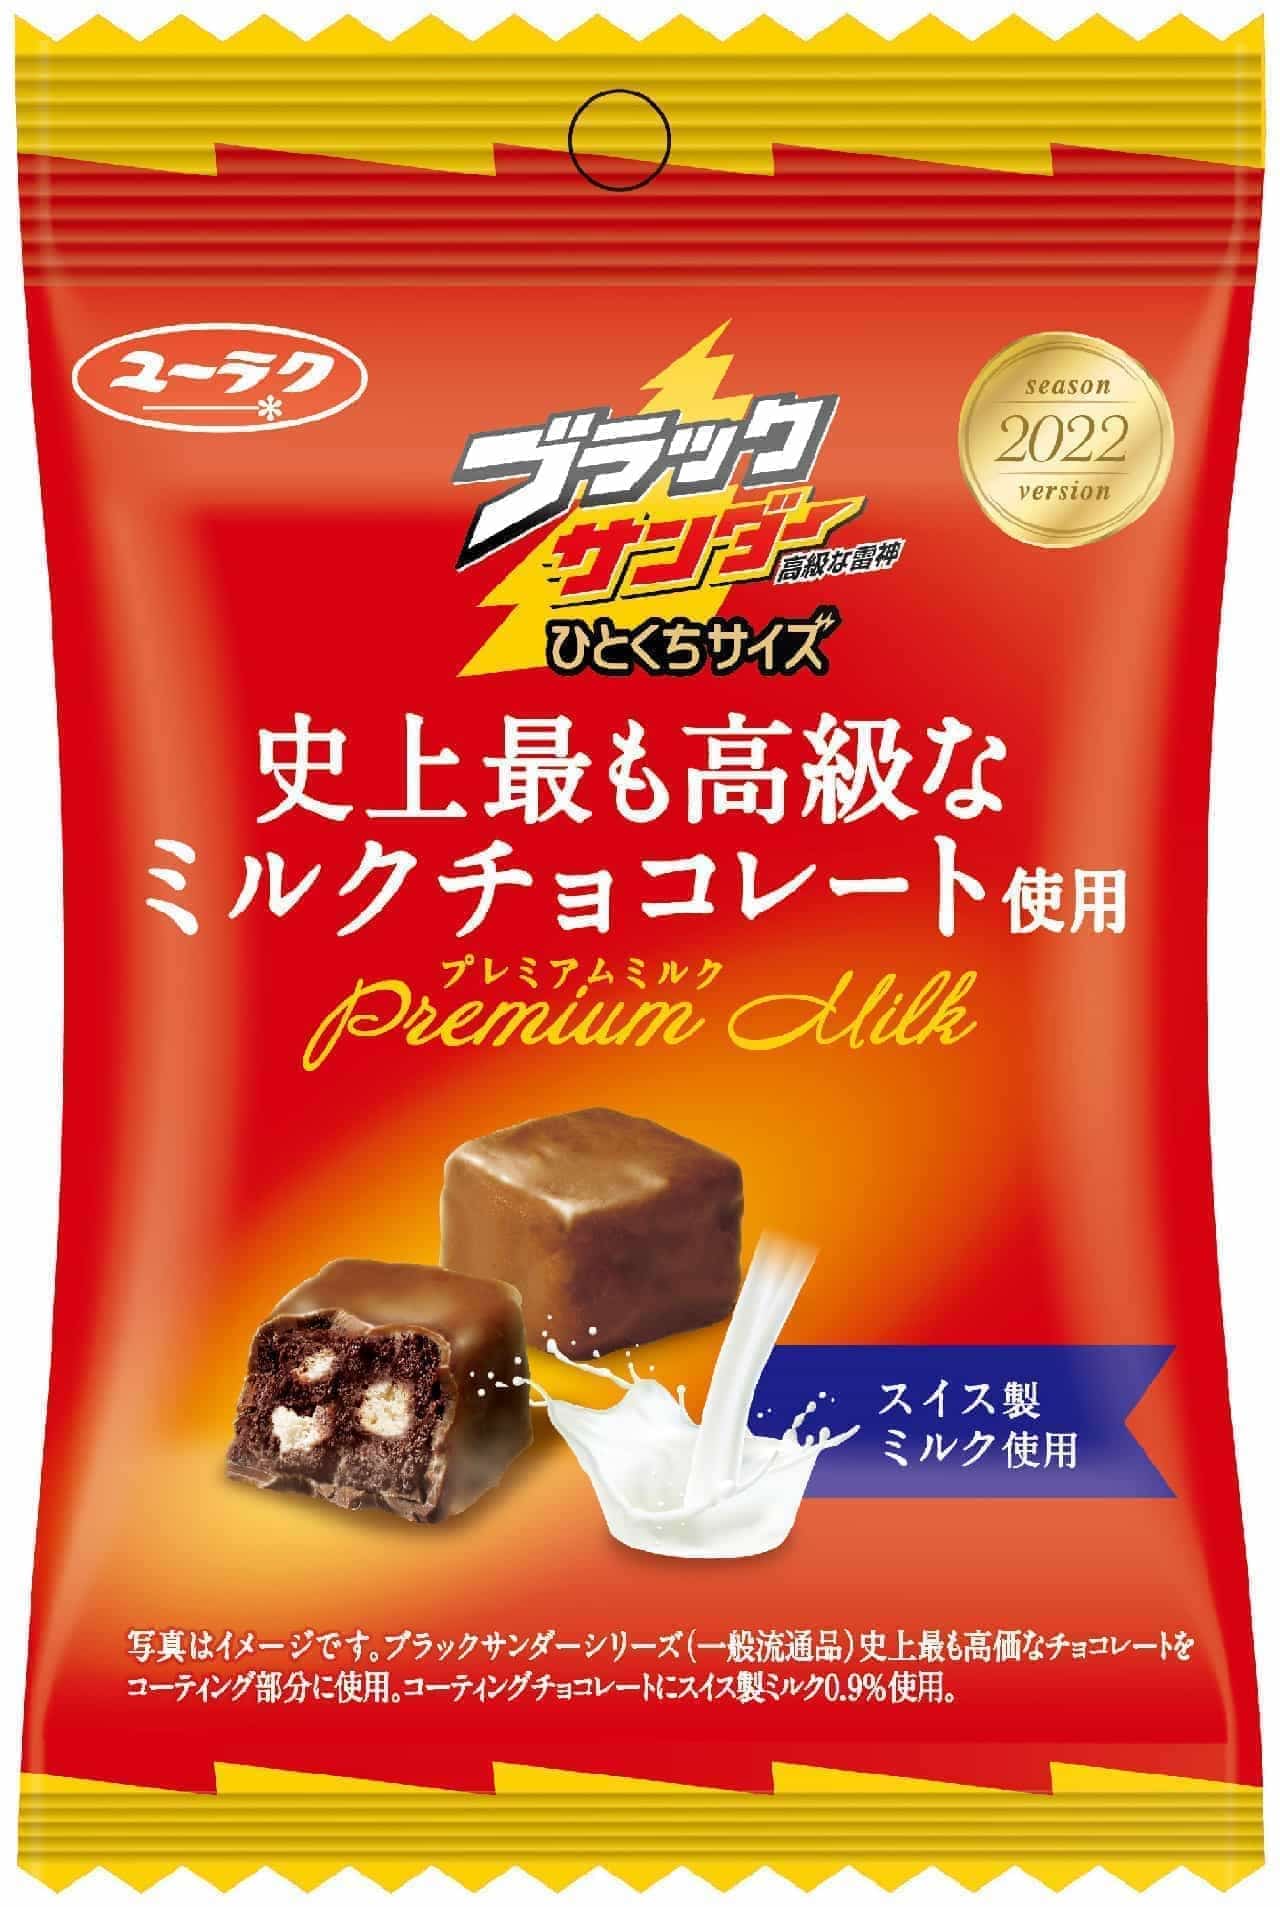 7-ELEVEN "Black Thunder's most exclusive milk chocolate in history"